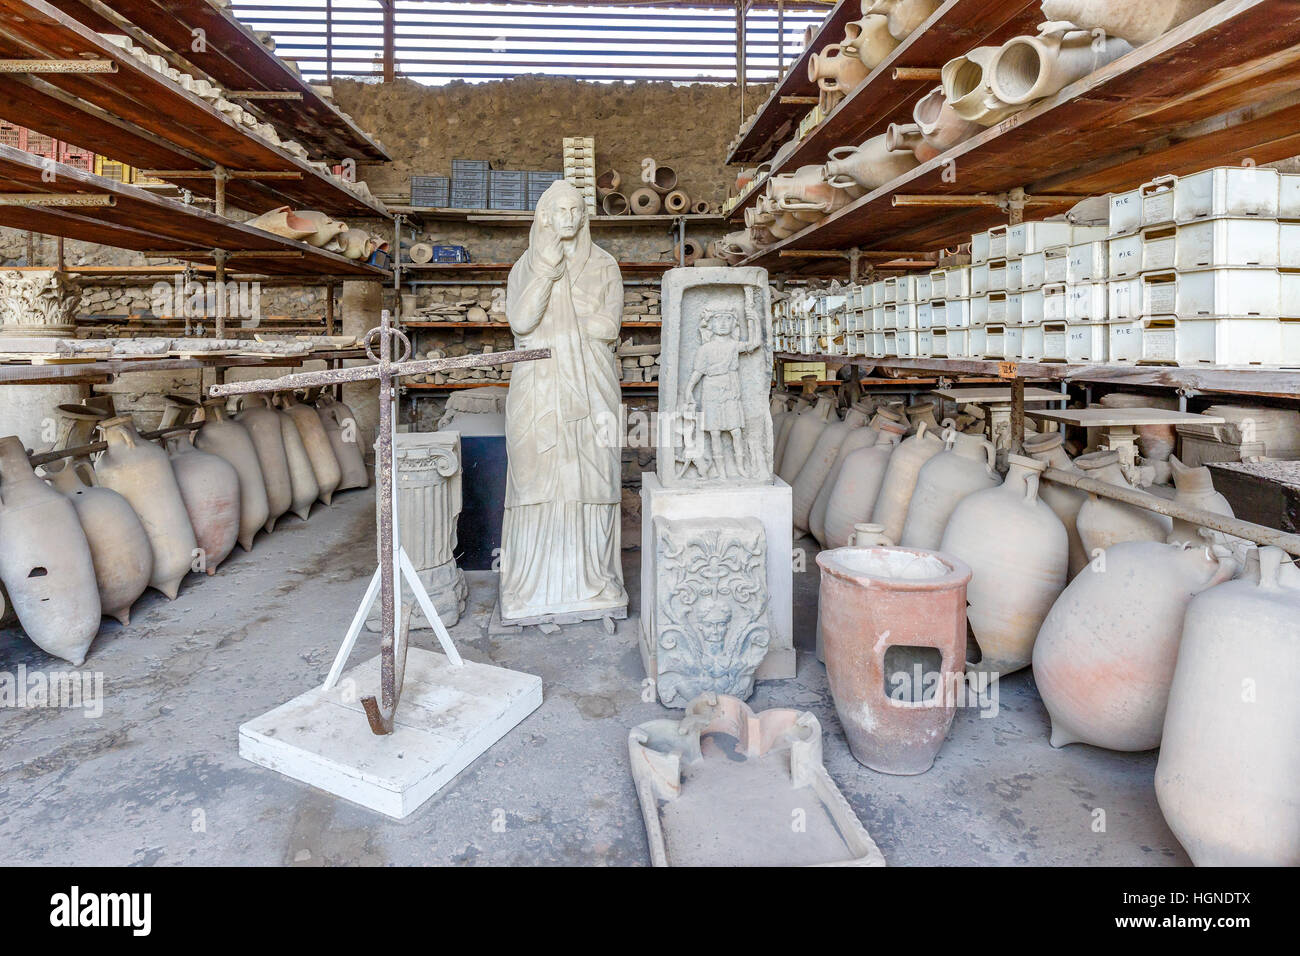 Storage facility for artifacts at the archaeological site of Pompeii, Campania, Southern Italy. UNESCO World Heritage Site. Stock Photo